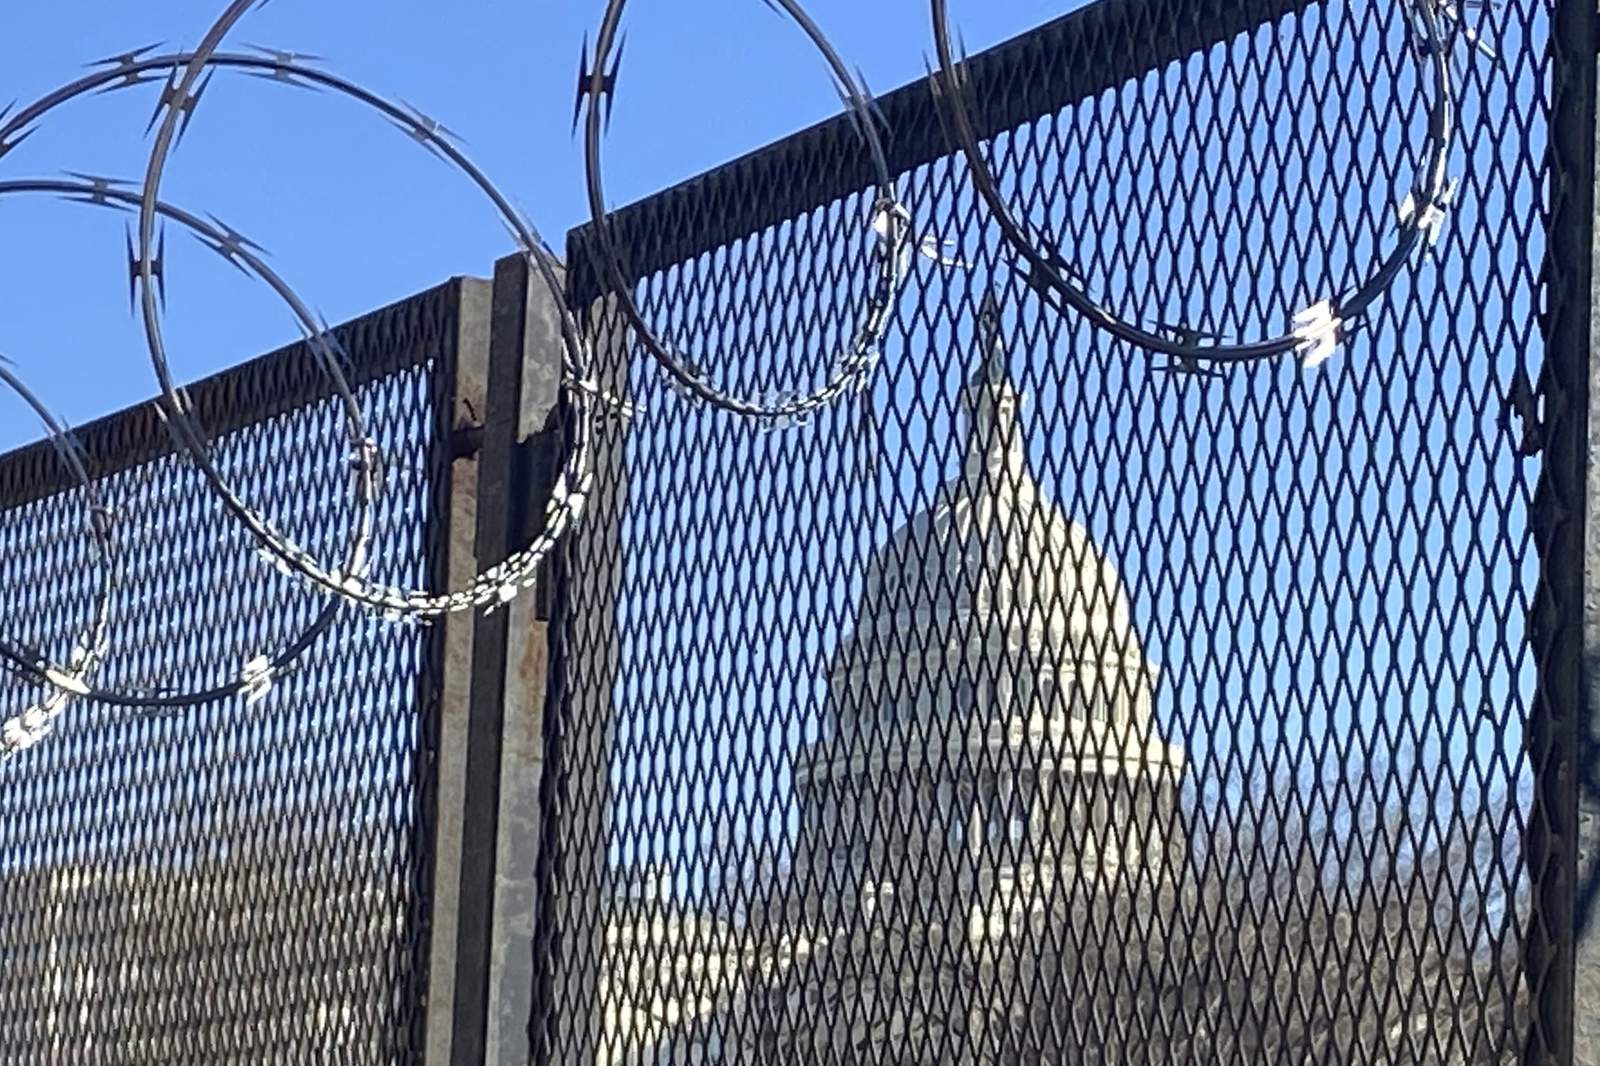 Capitol fences highlight delicate dance over safety, access